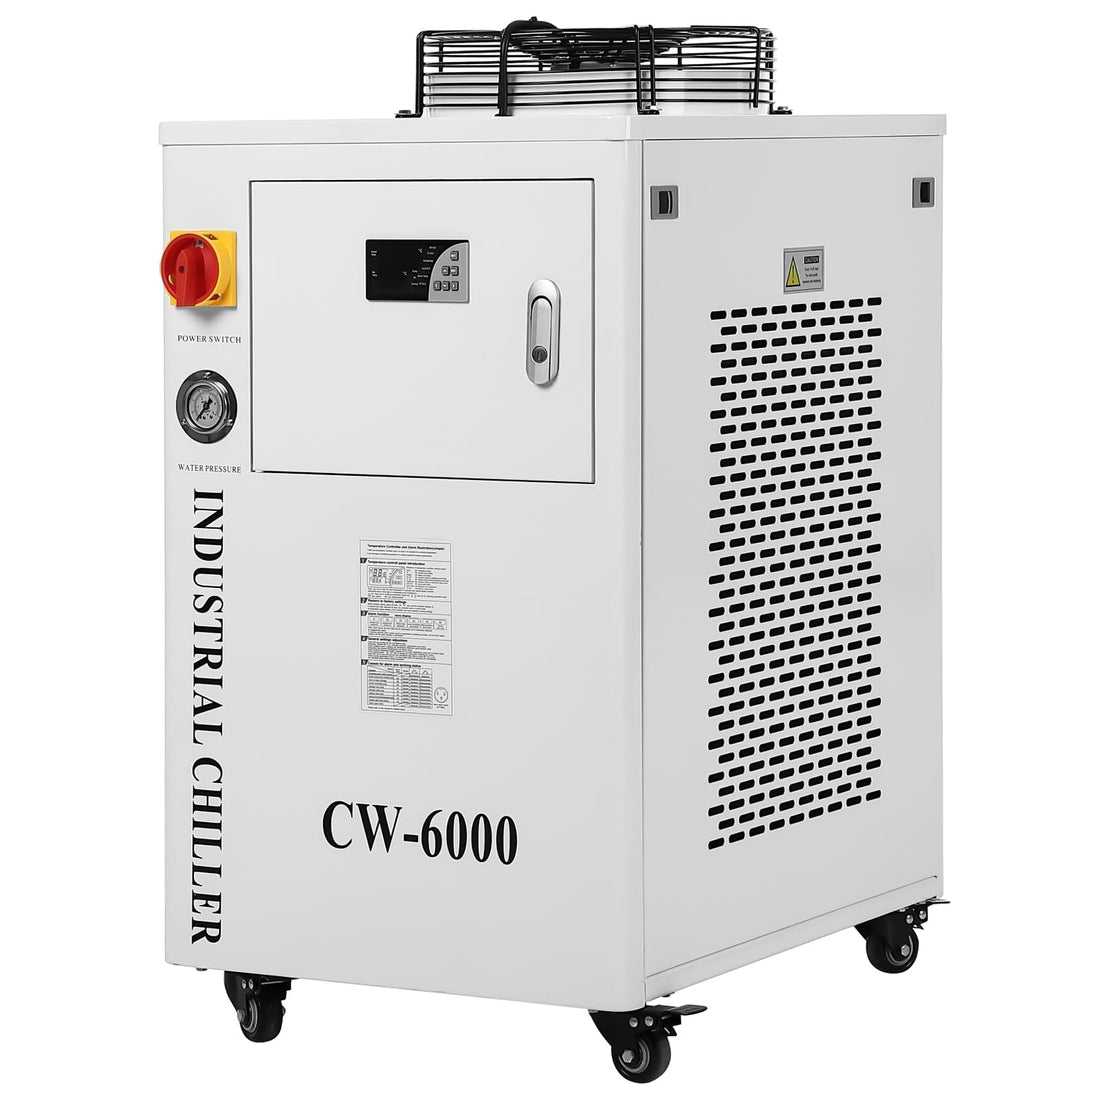 15L Industrial Water Chiller CW-6000 0.73hp 8.7gpm Water Cooling System Water Cooler